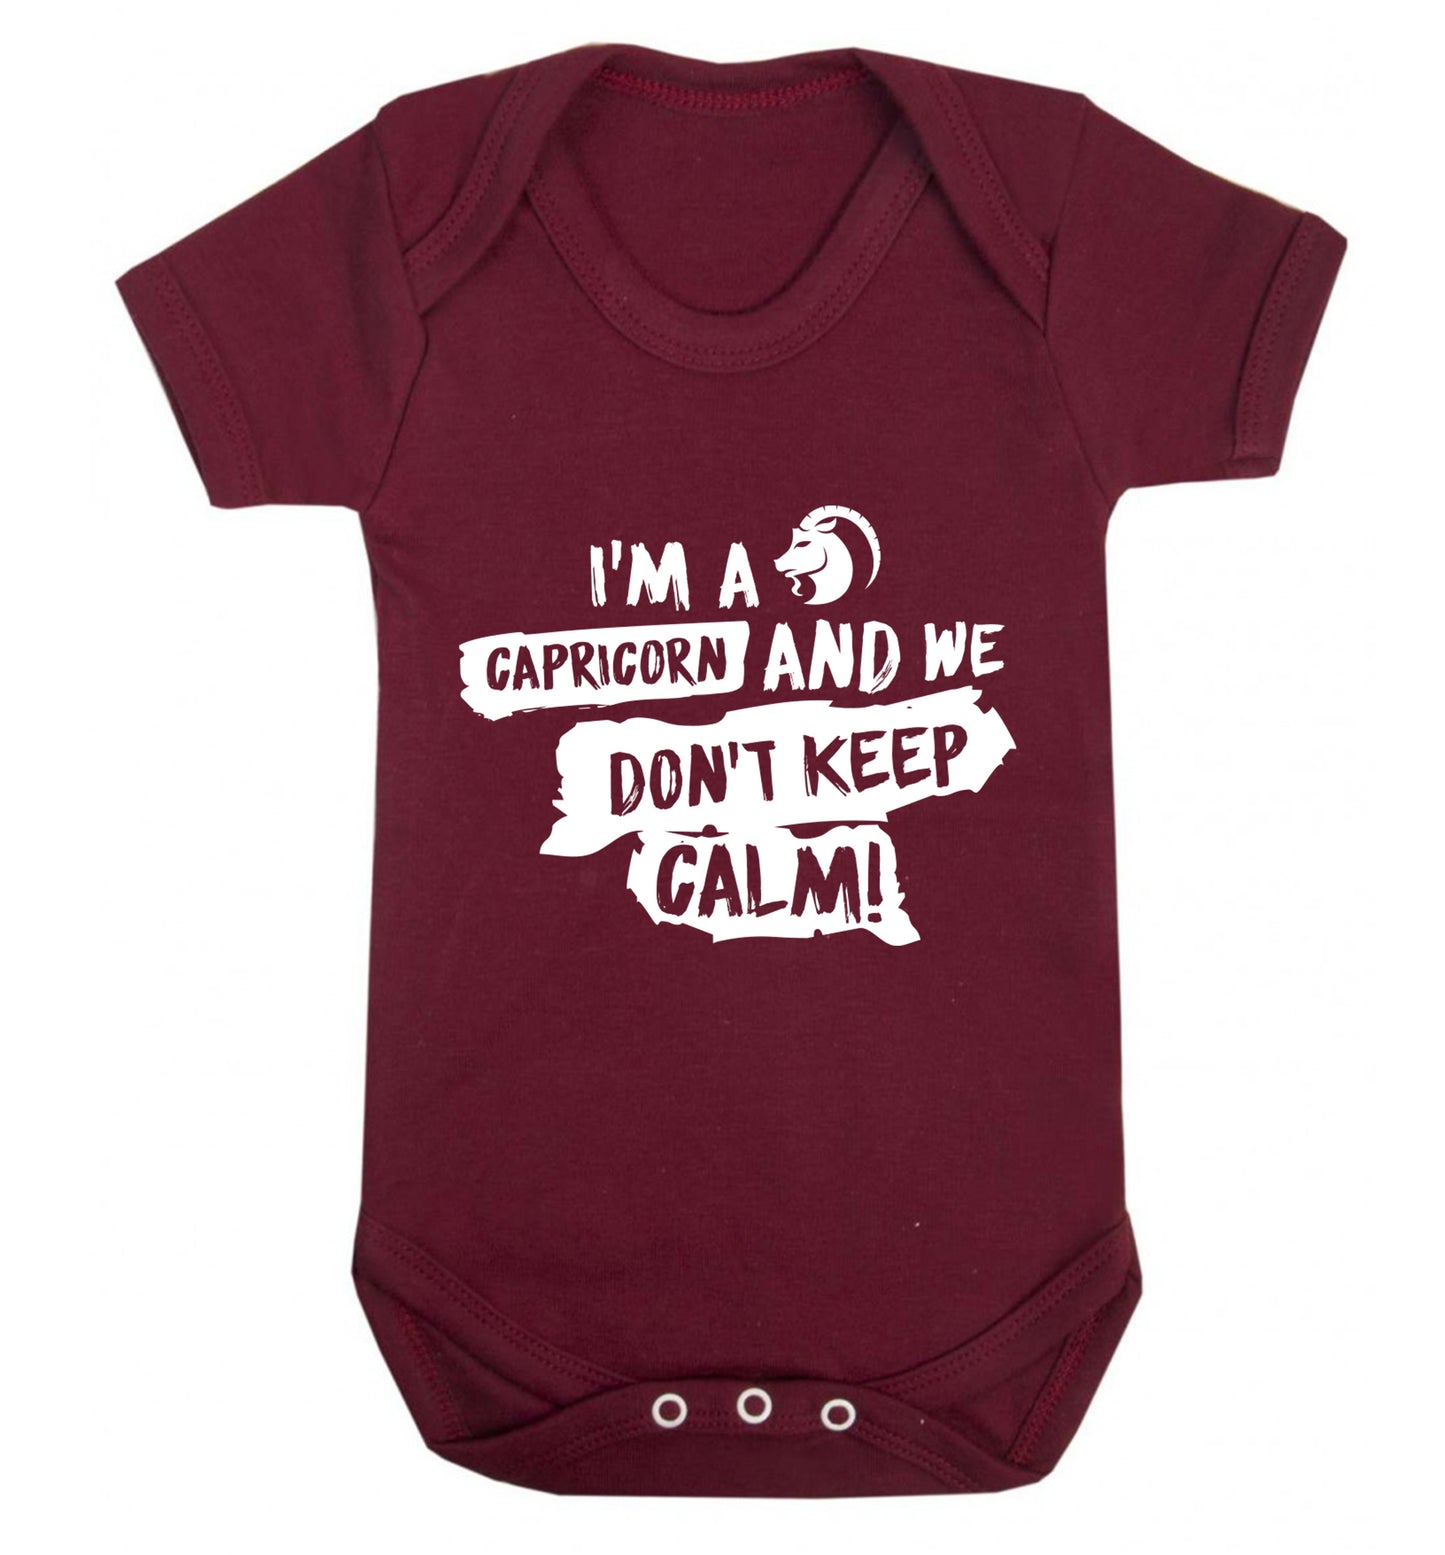 I'm a capricorn and we don't keep calm Baby Vest maroon 18-24 months